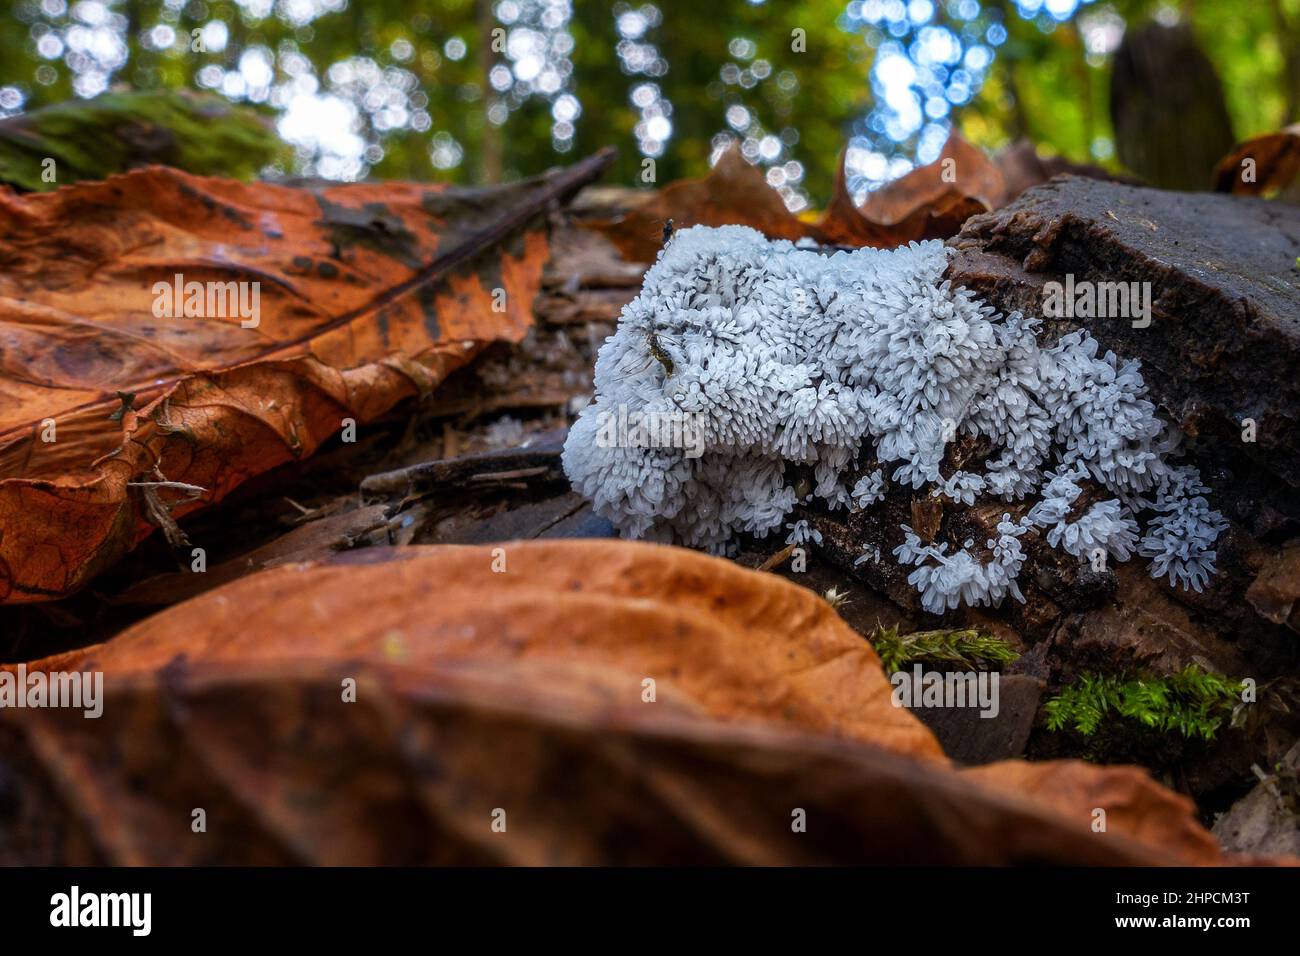 Coral slime (Ceratiomyxa fruticulosa), a type of slime mold on dead wood, UK Stock Photo